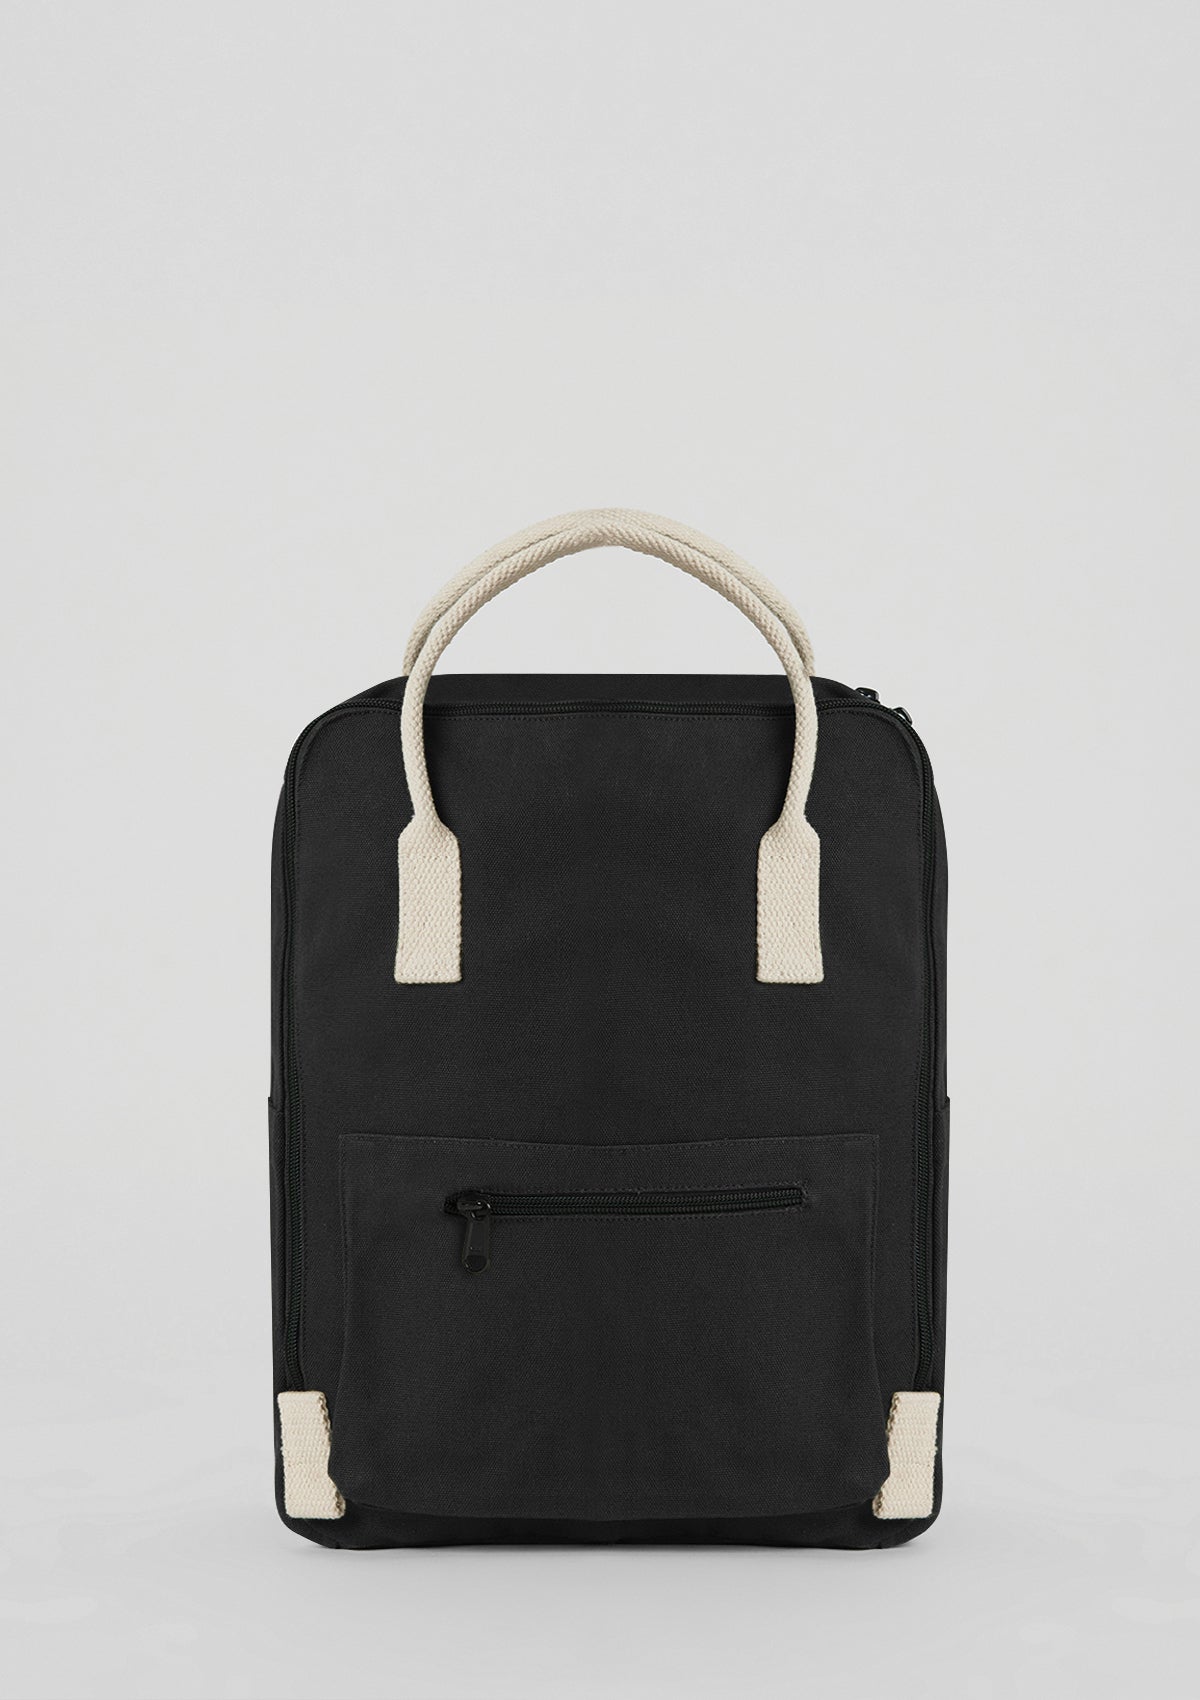 Black Laptop Bag Made with Sustainable Material